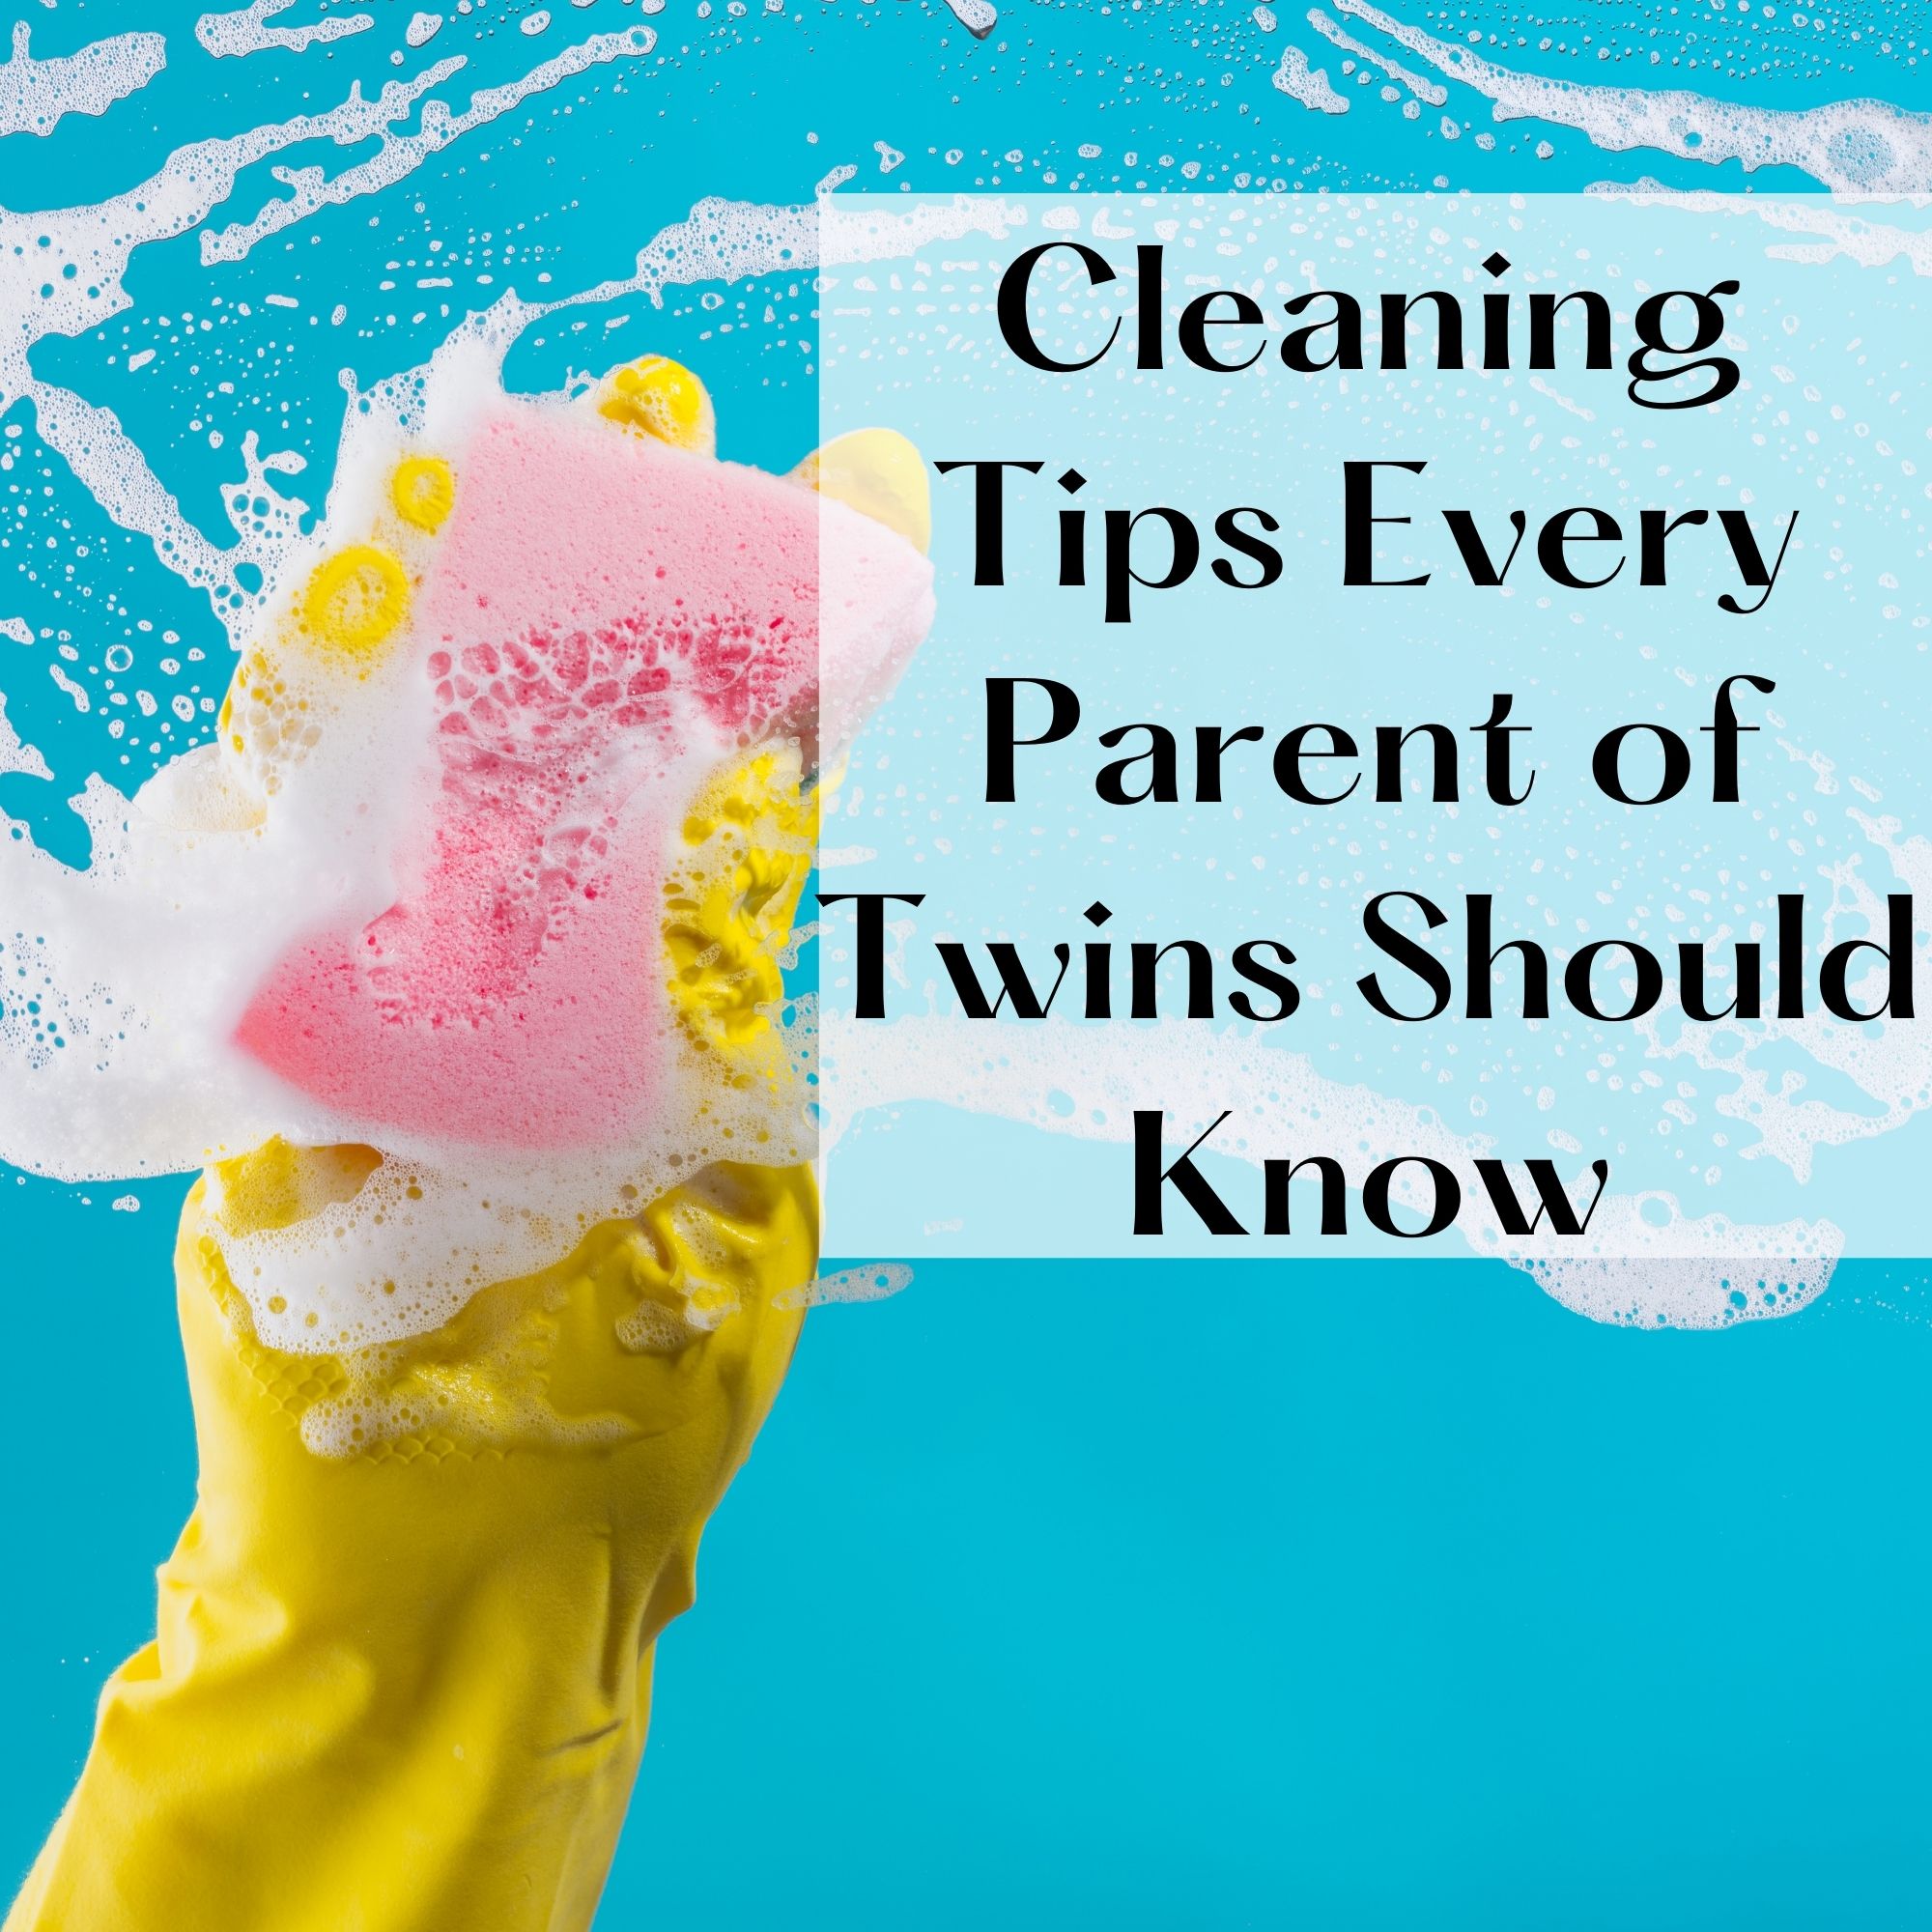 Cleaning Tips Every Parent of Twins Should Know